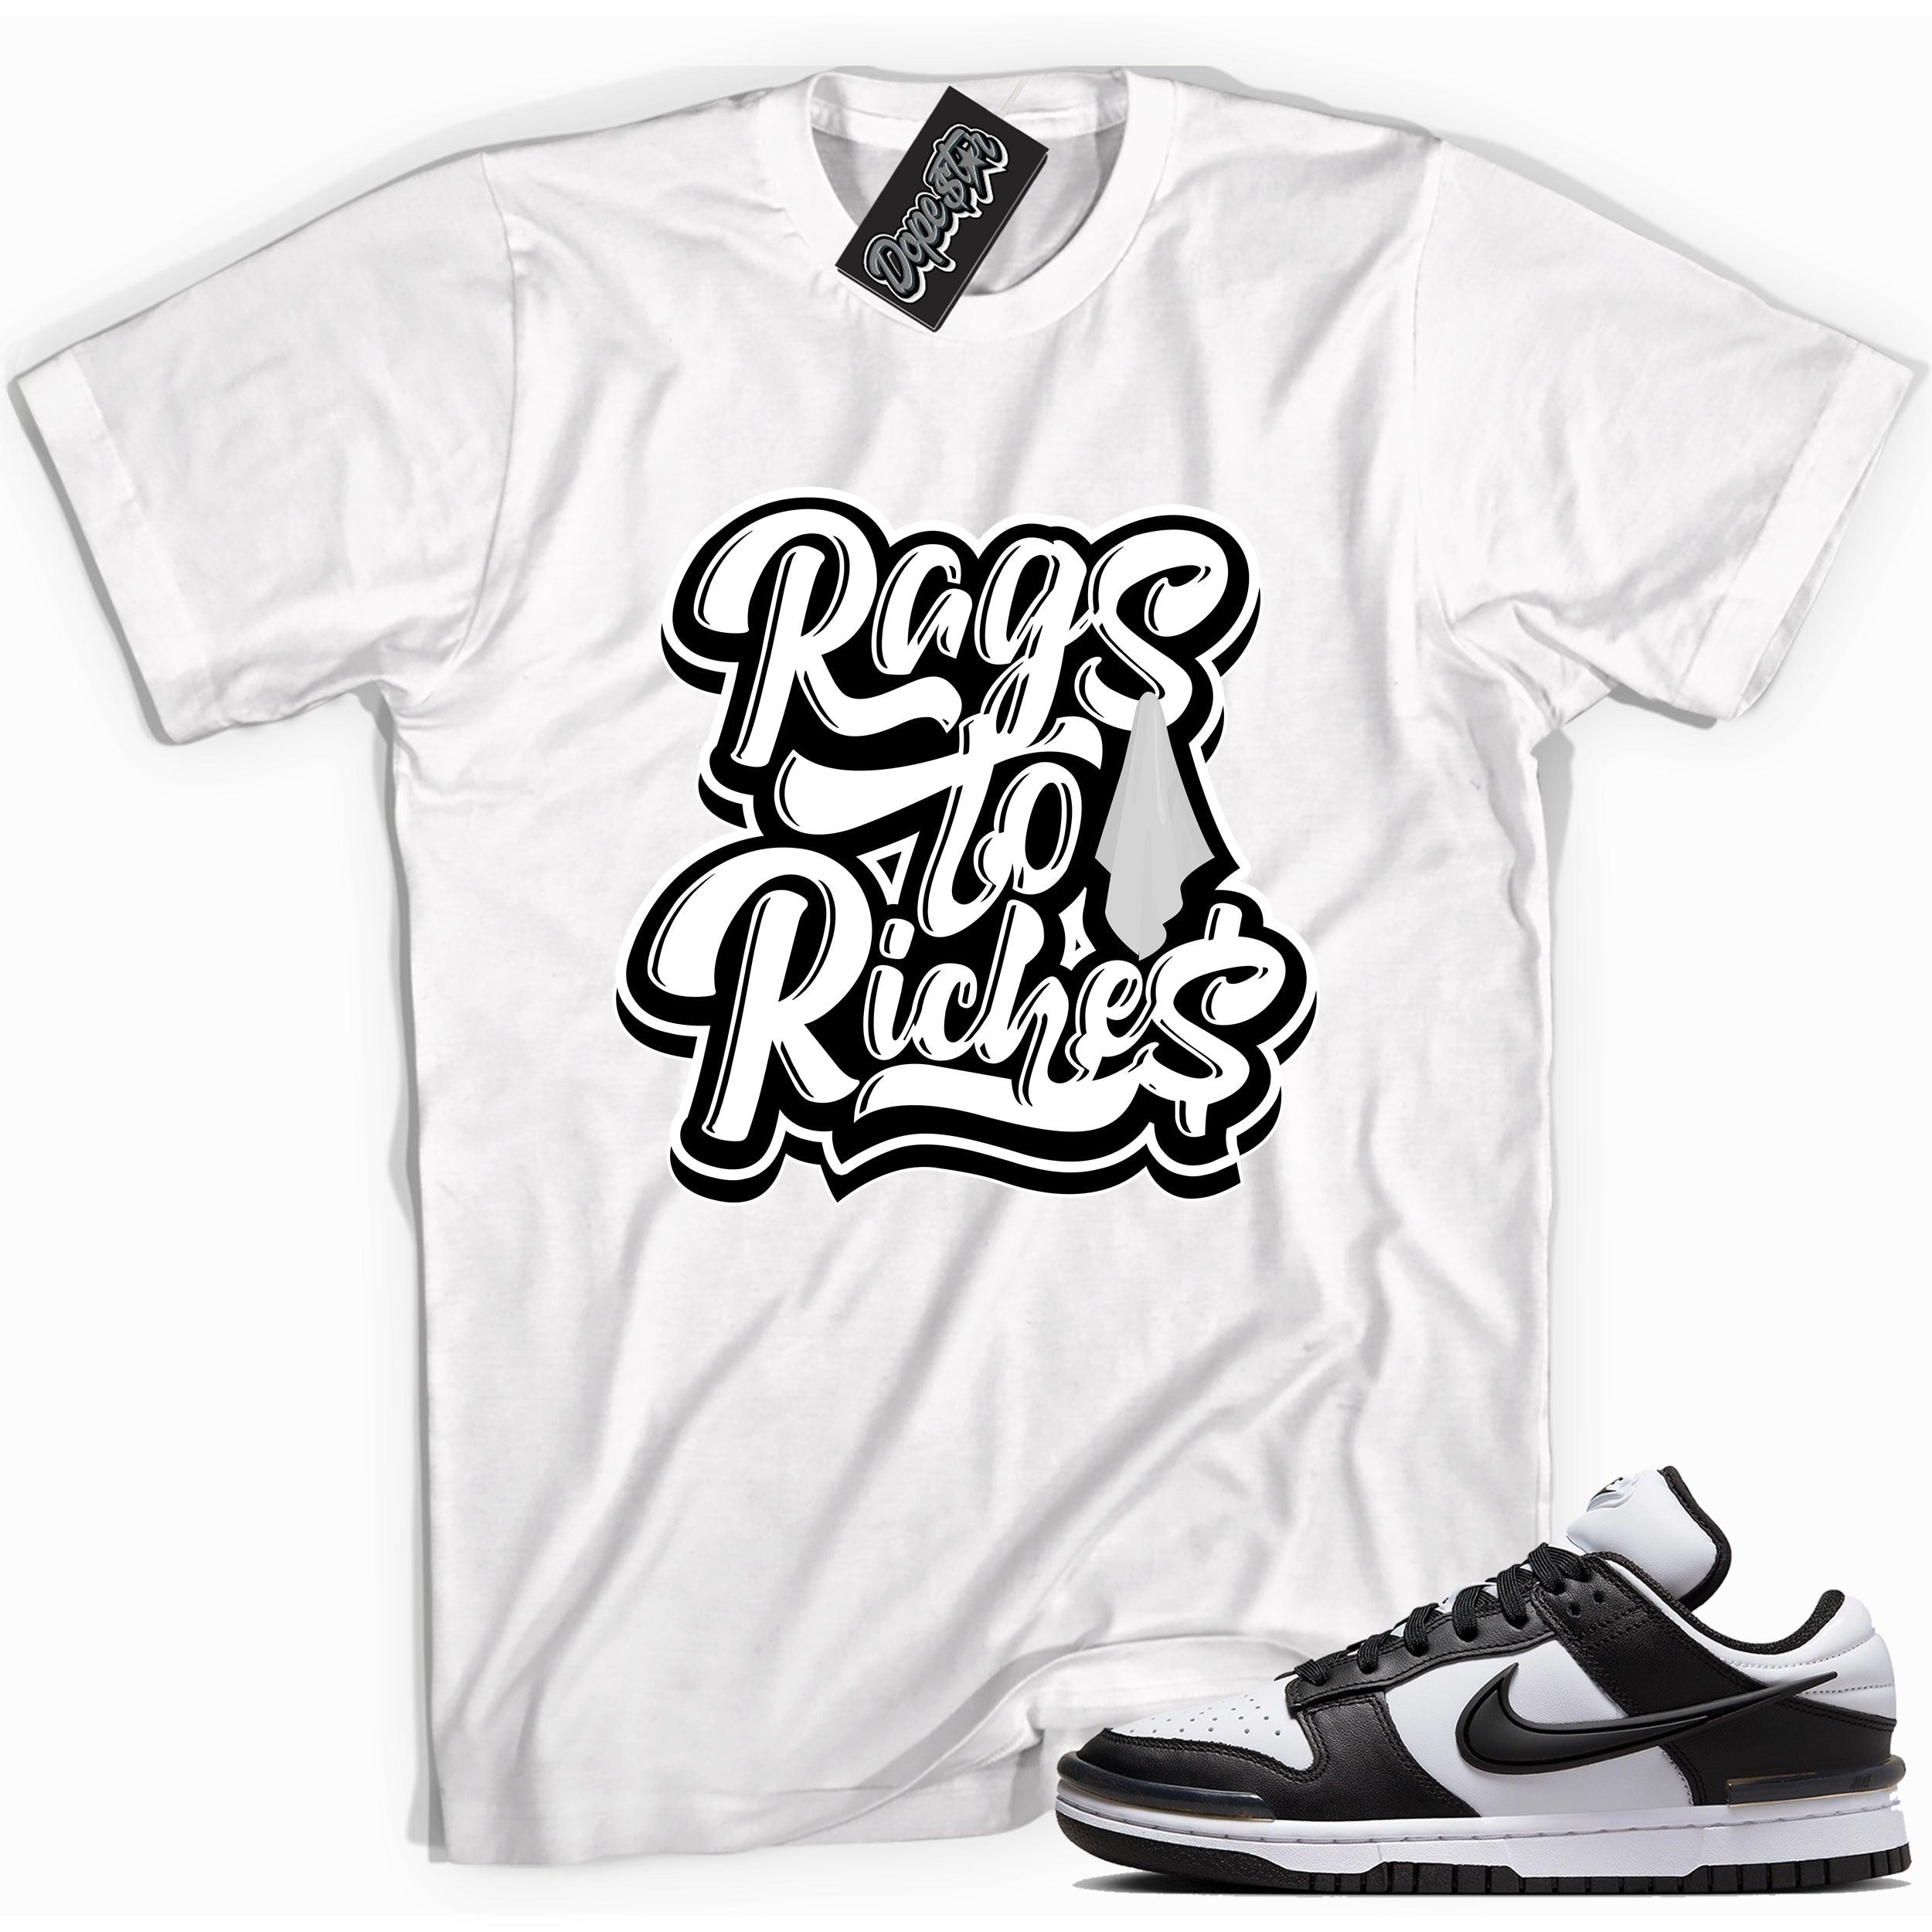 Cool white graphic tee with 'Rags to riches' print, that perfectly matches Nike Dunk Low Twist Panda sneakers.